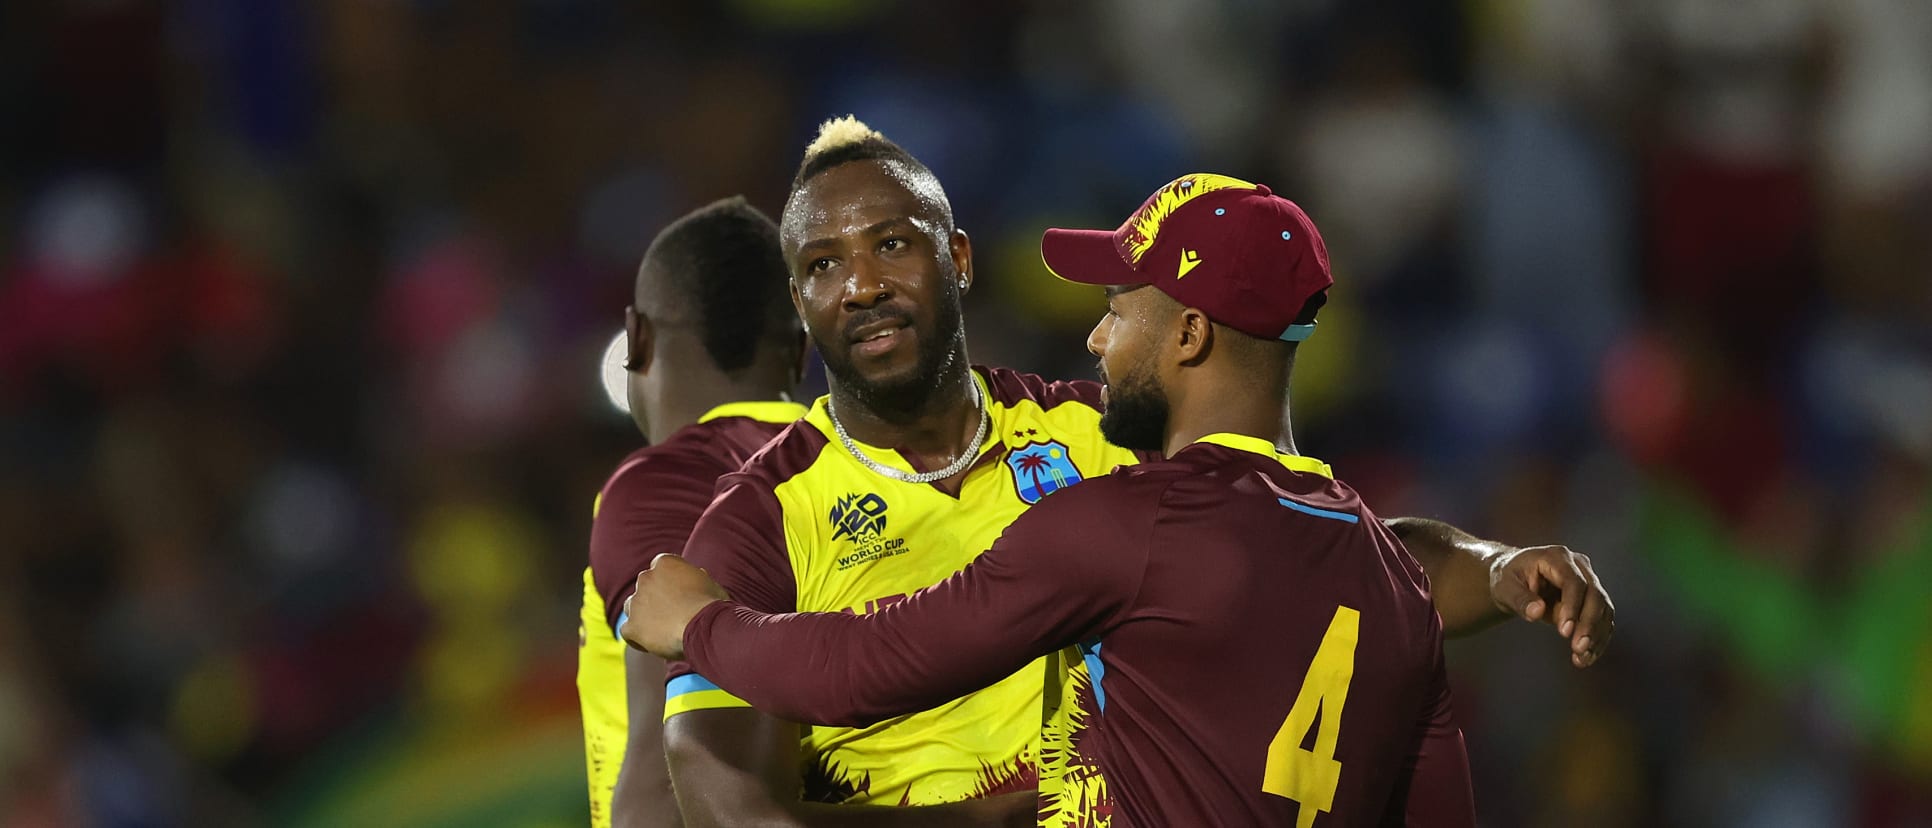 West Indies’ Dominant Victory Over Afghanistan Secures Top Spot in Group C